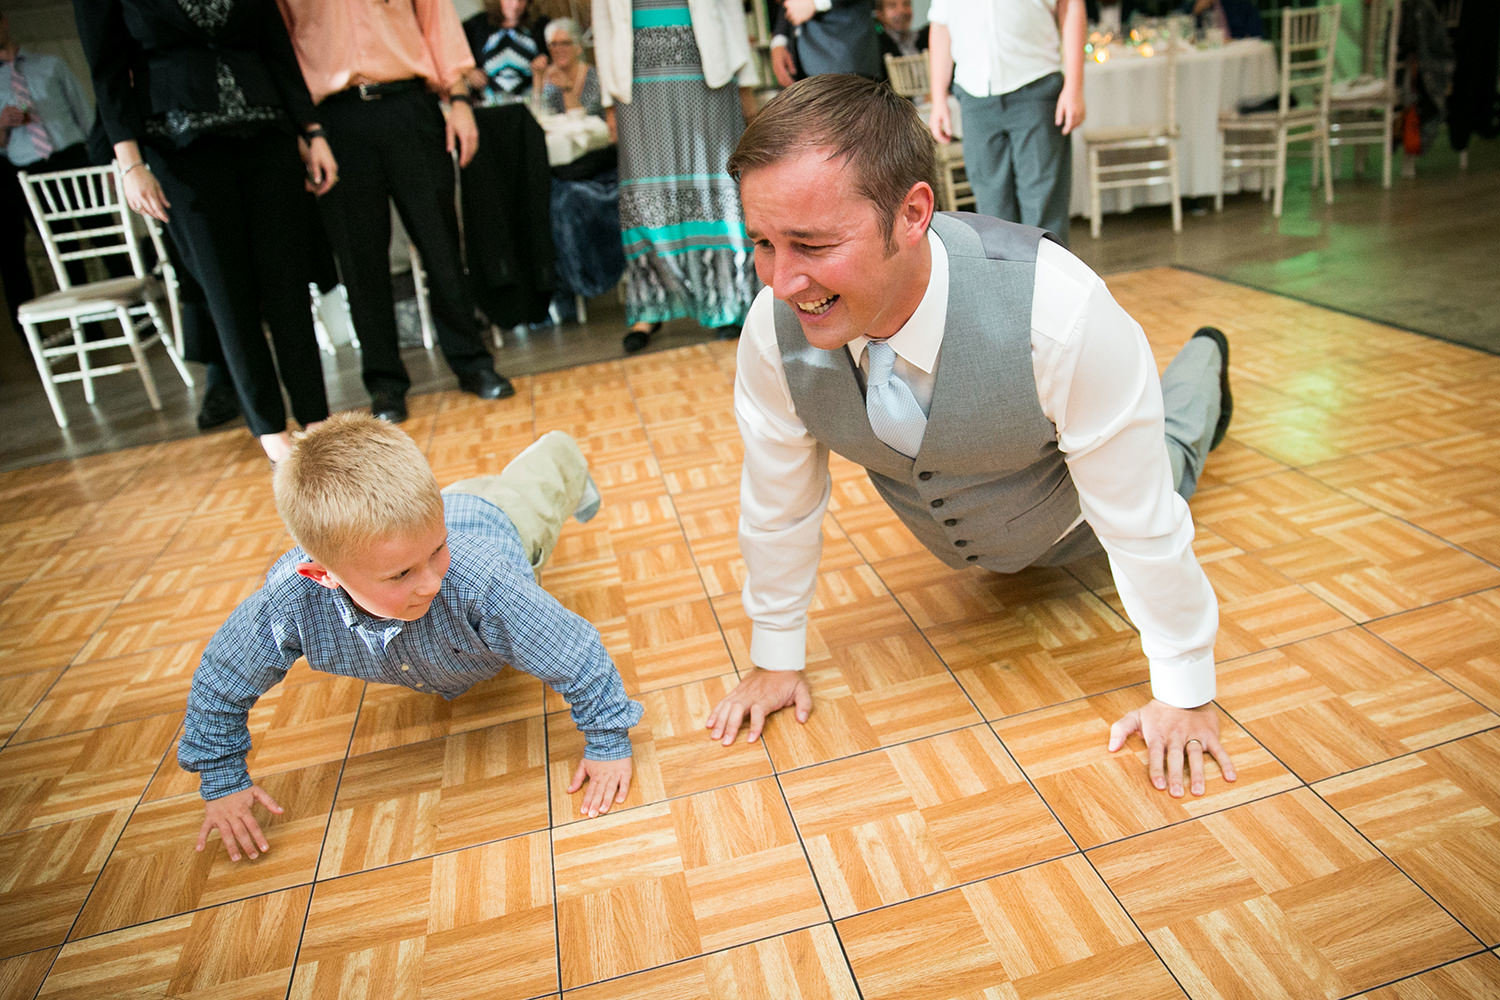 groom dancing with kids at reception